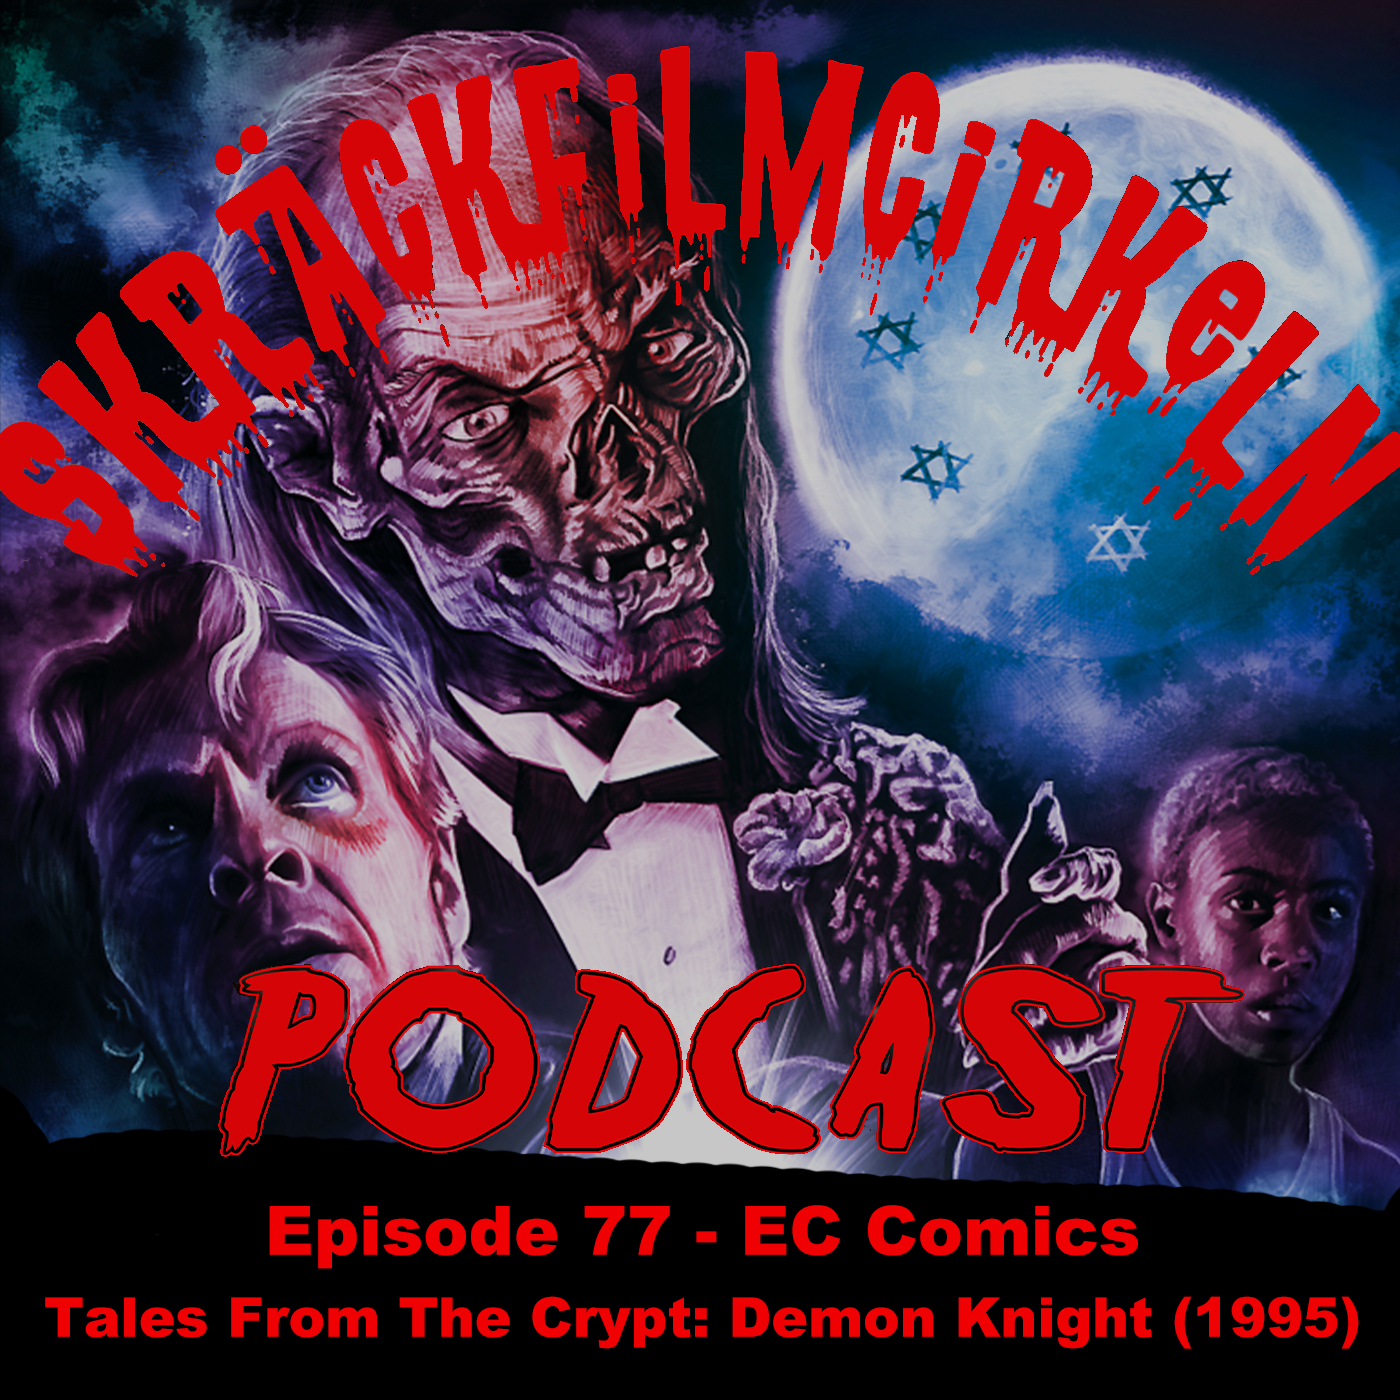 Episode 77 – EC Comics – Tales From The Crypt: Demon Knight (1995)